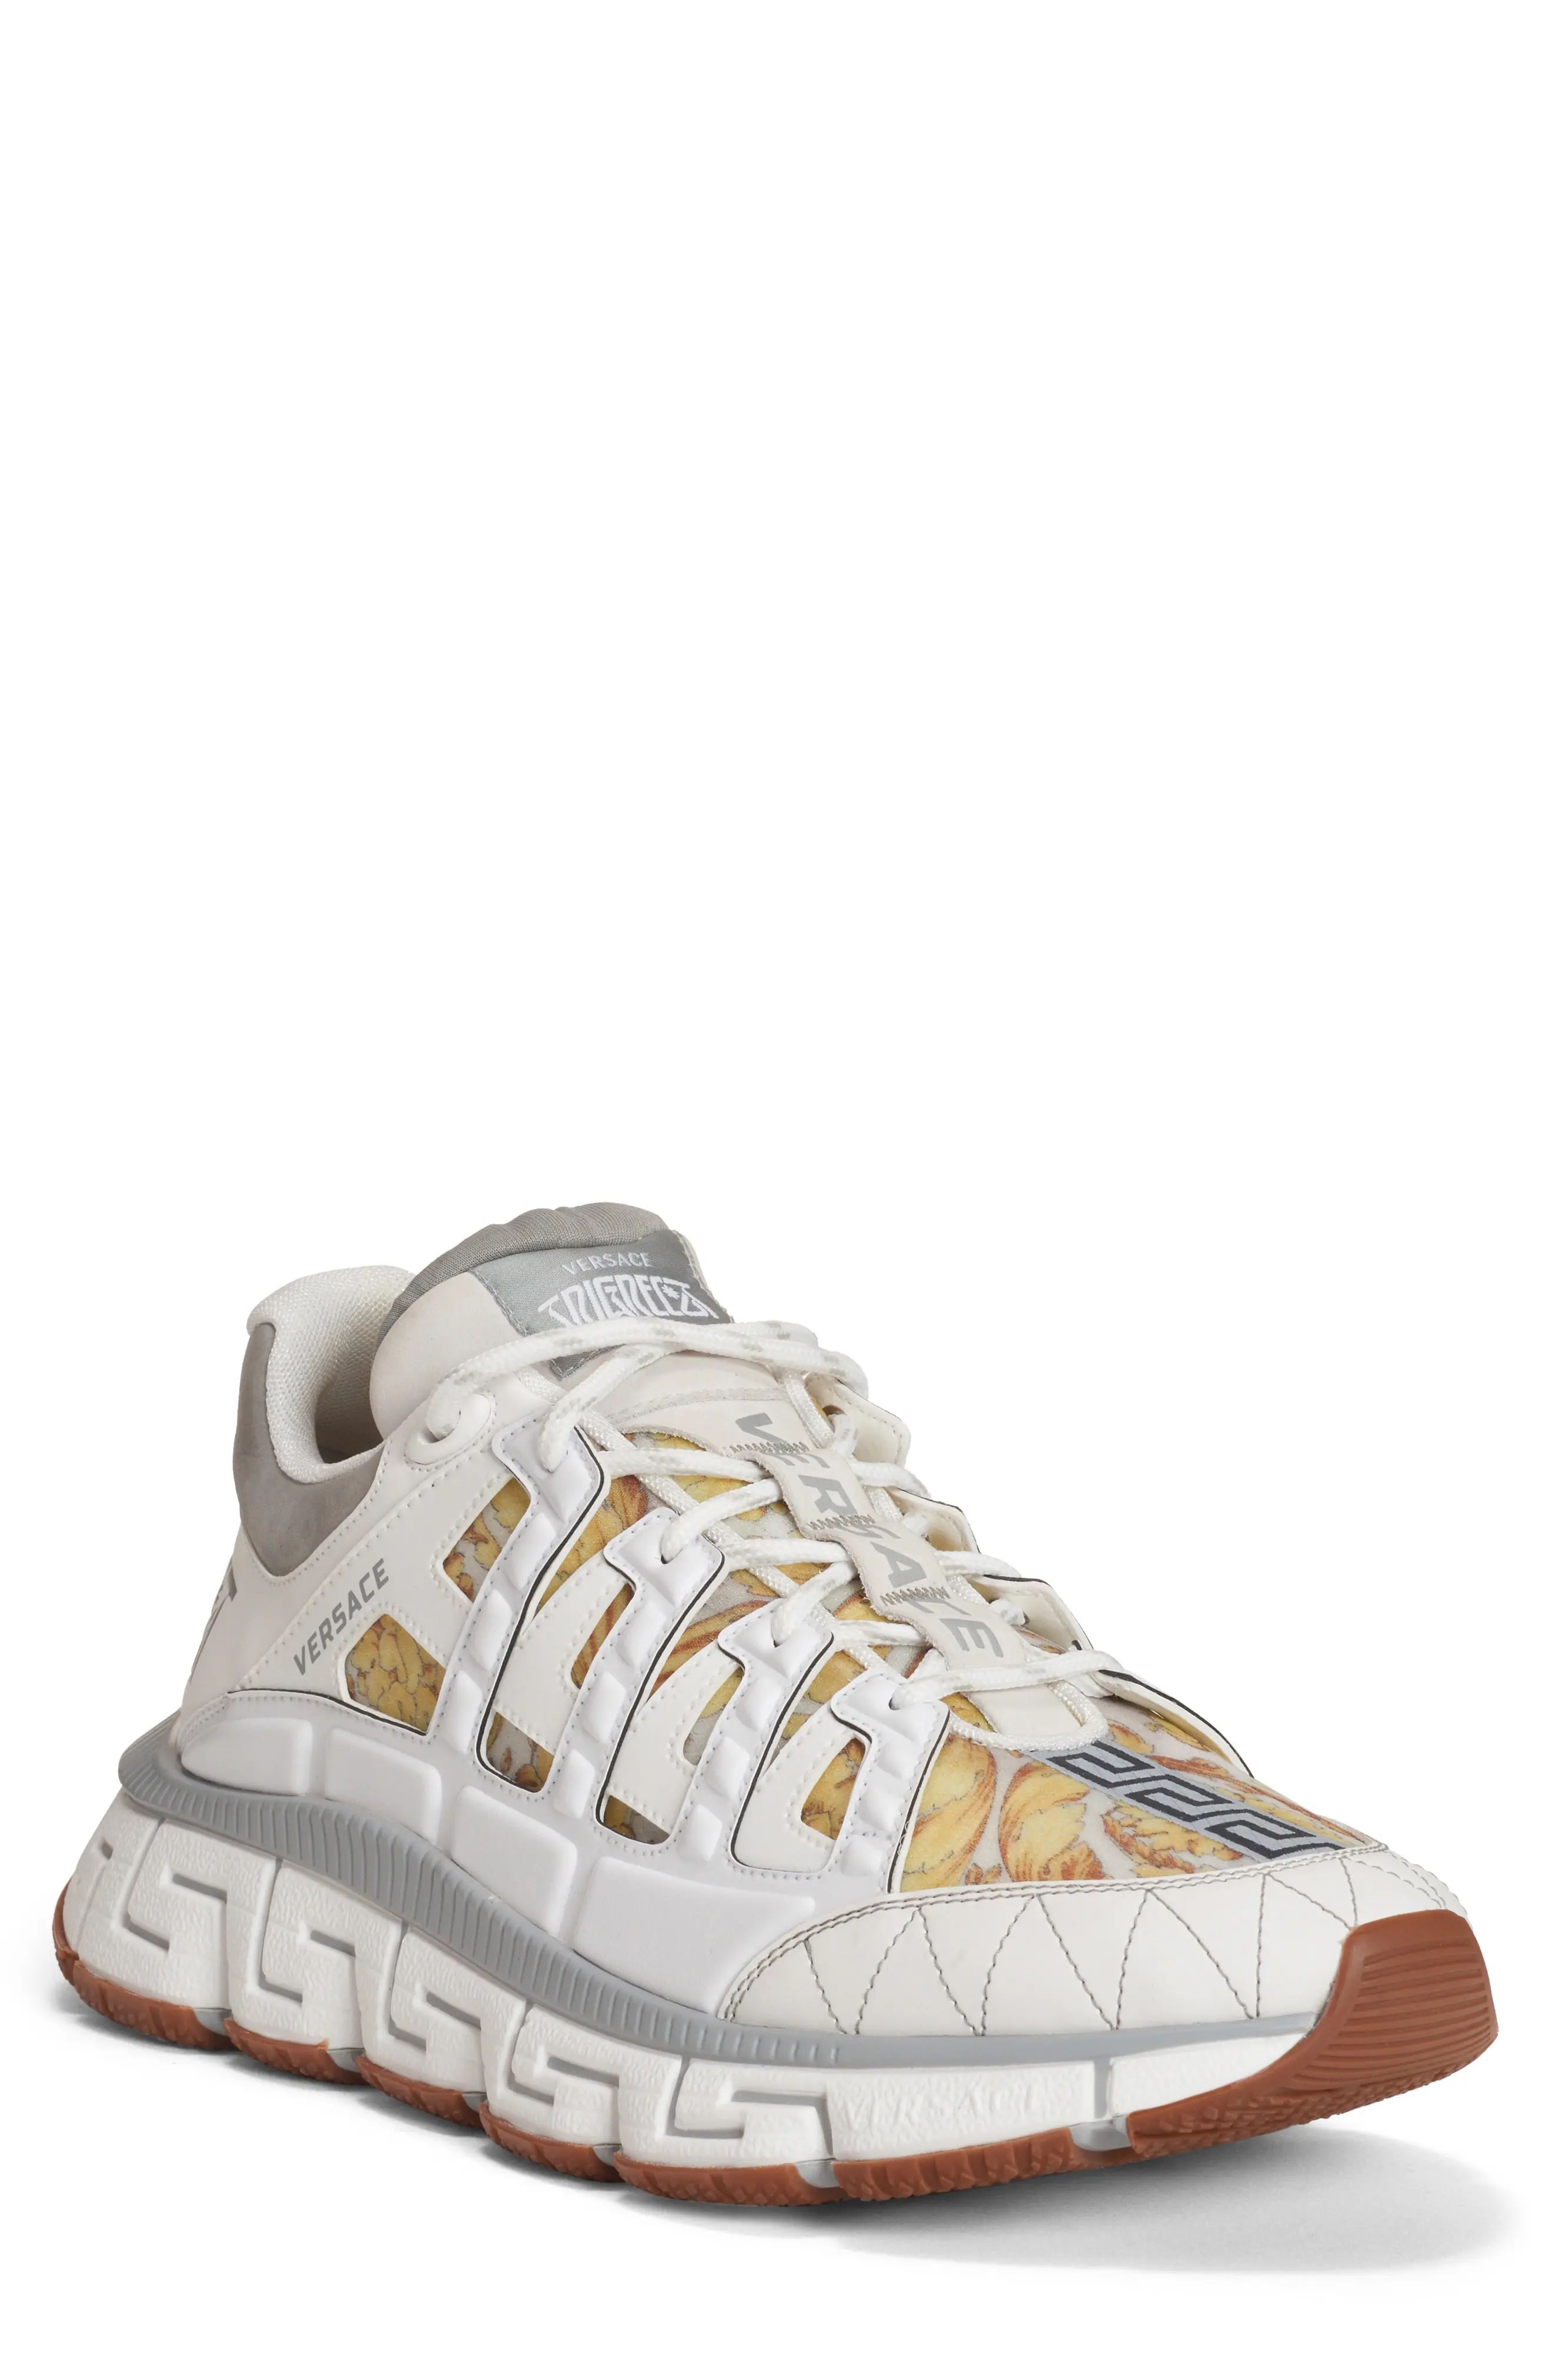 Versace First Line Versace Trigreca Low Top Sneaker in White Grey Gold at Nordstrom, Size 9Us | Nordstrom